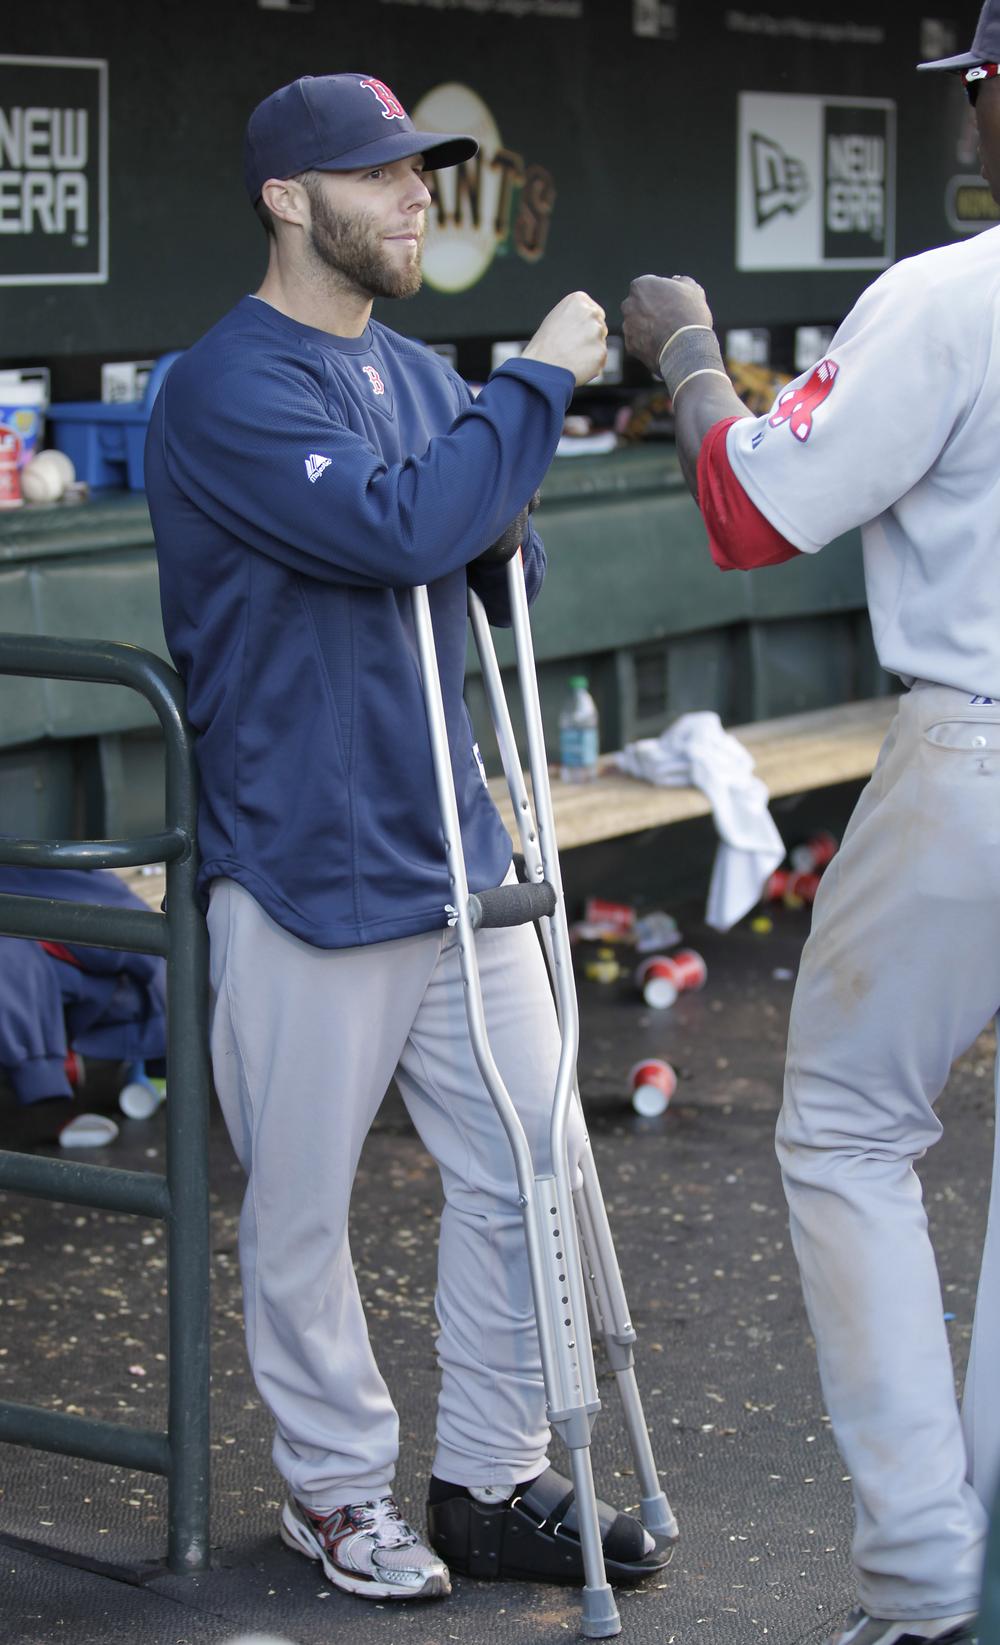 Dustin Pedroia, left, is seen in the dugout on crutches congratulating teammates after a 4-2 victory against the San Francisco Giants on Saturday. (AP)